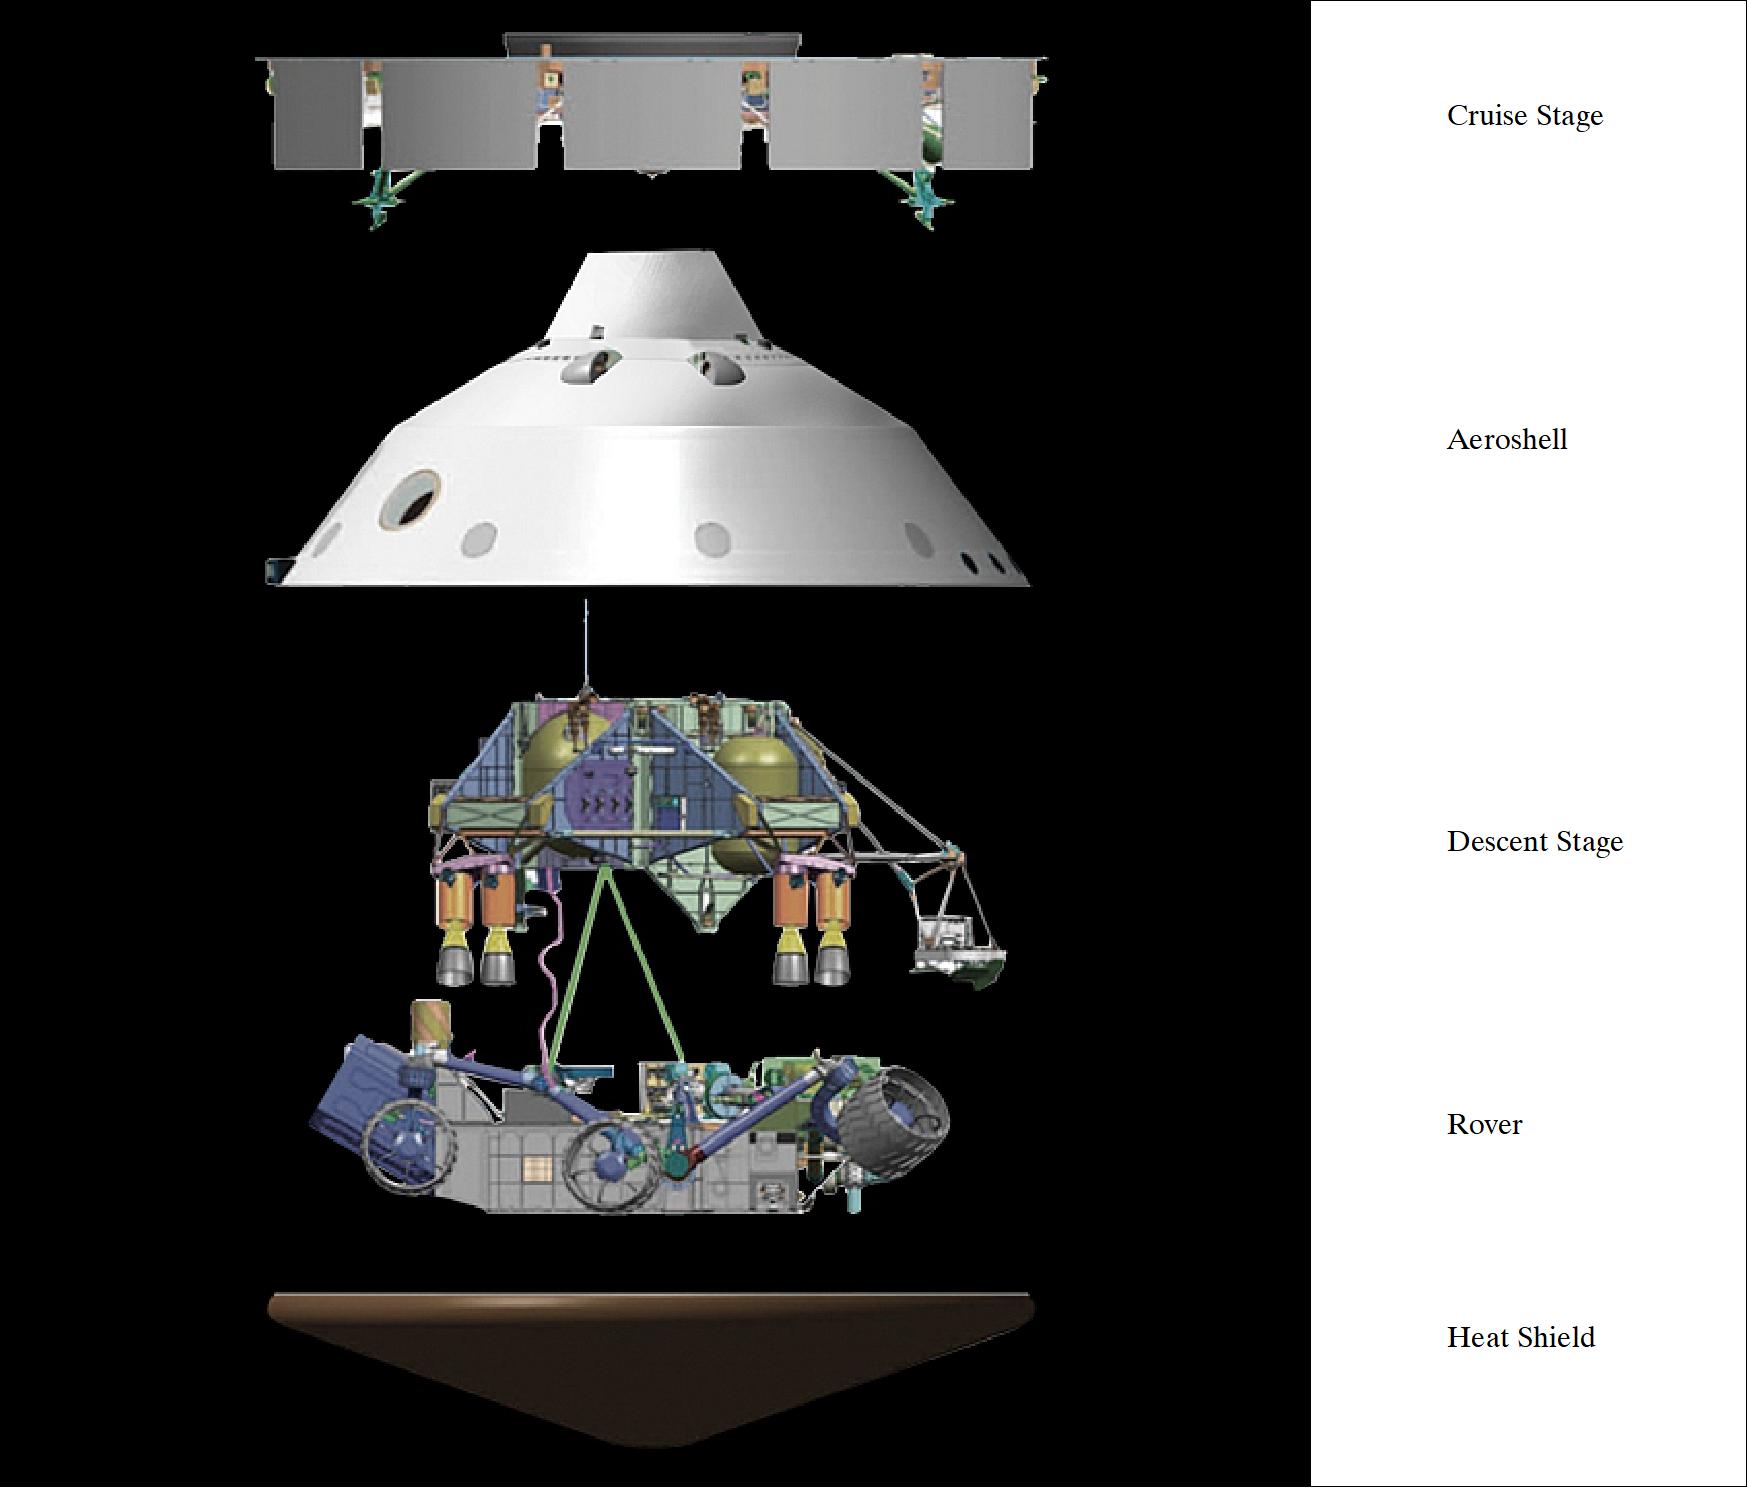 Figure 3: The cruise stage, aeroshell, descent stage, rover and heat shield together make up the spacecraft. As the spacecraft travels down through the Martian atmosphere, certain parts fall away one by one until the rover is safely on solid Martian ground (image credit: NASA)